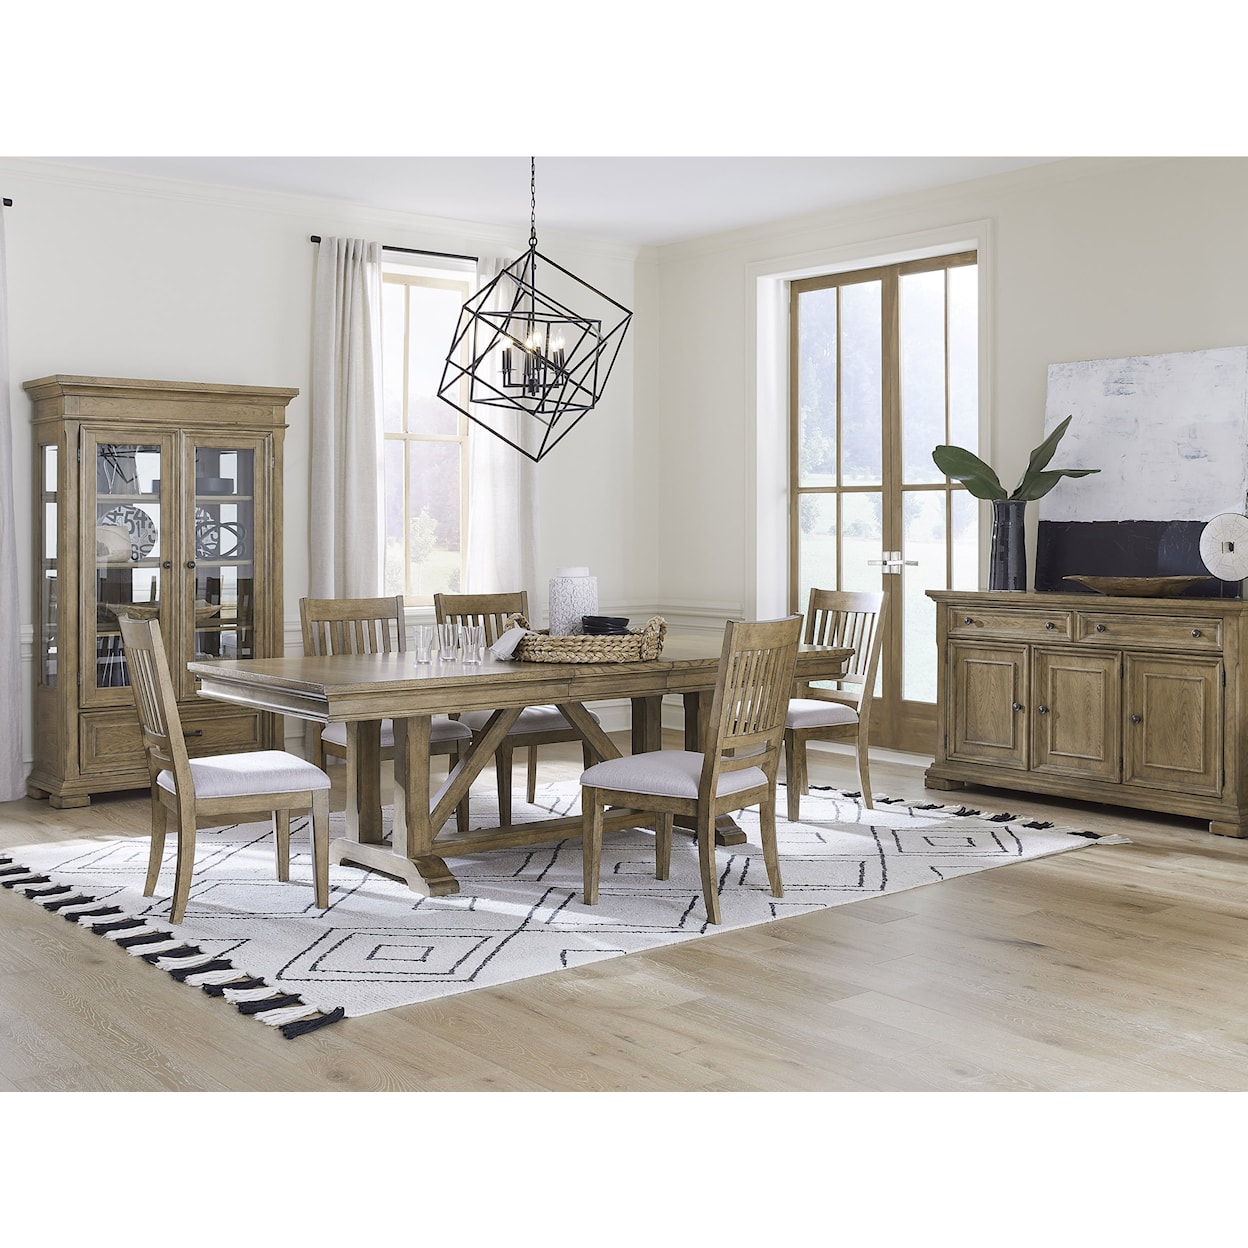 Drew & Jonathan Home Summit Trestle Table with 6 Chairs